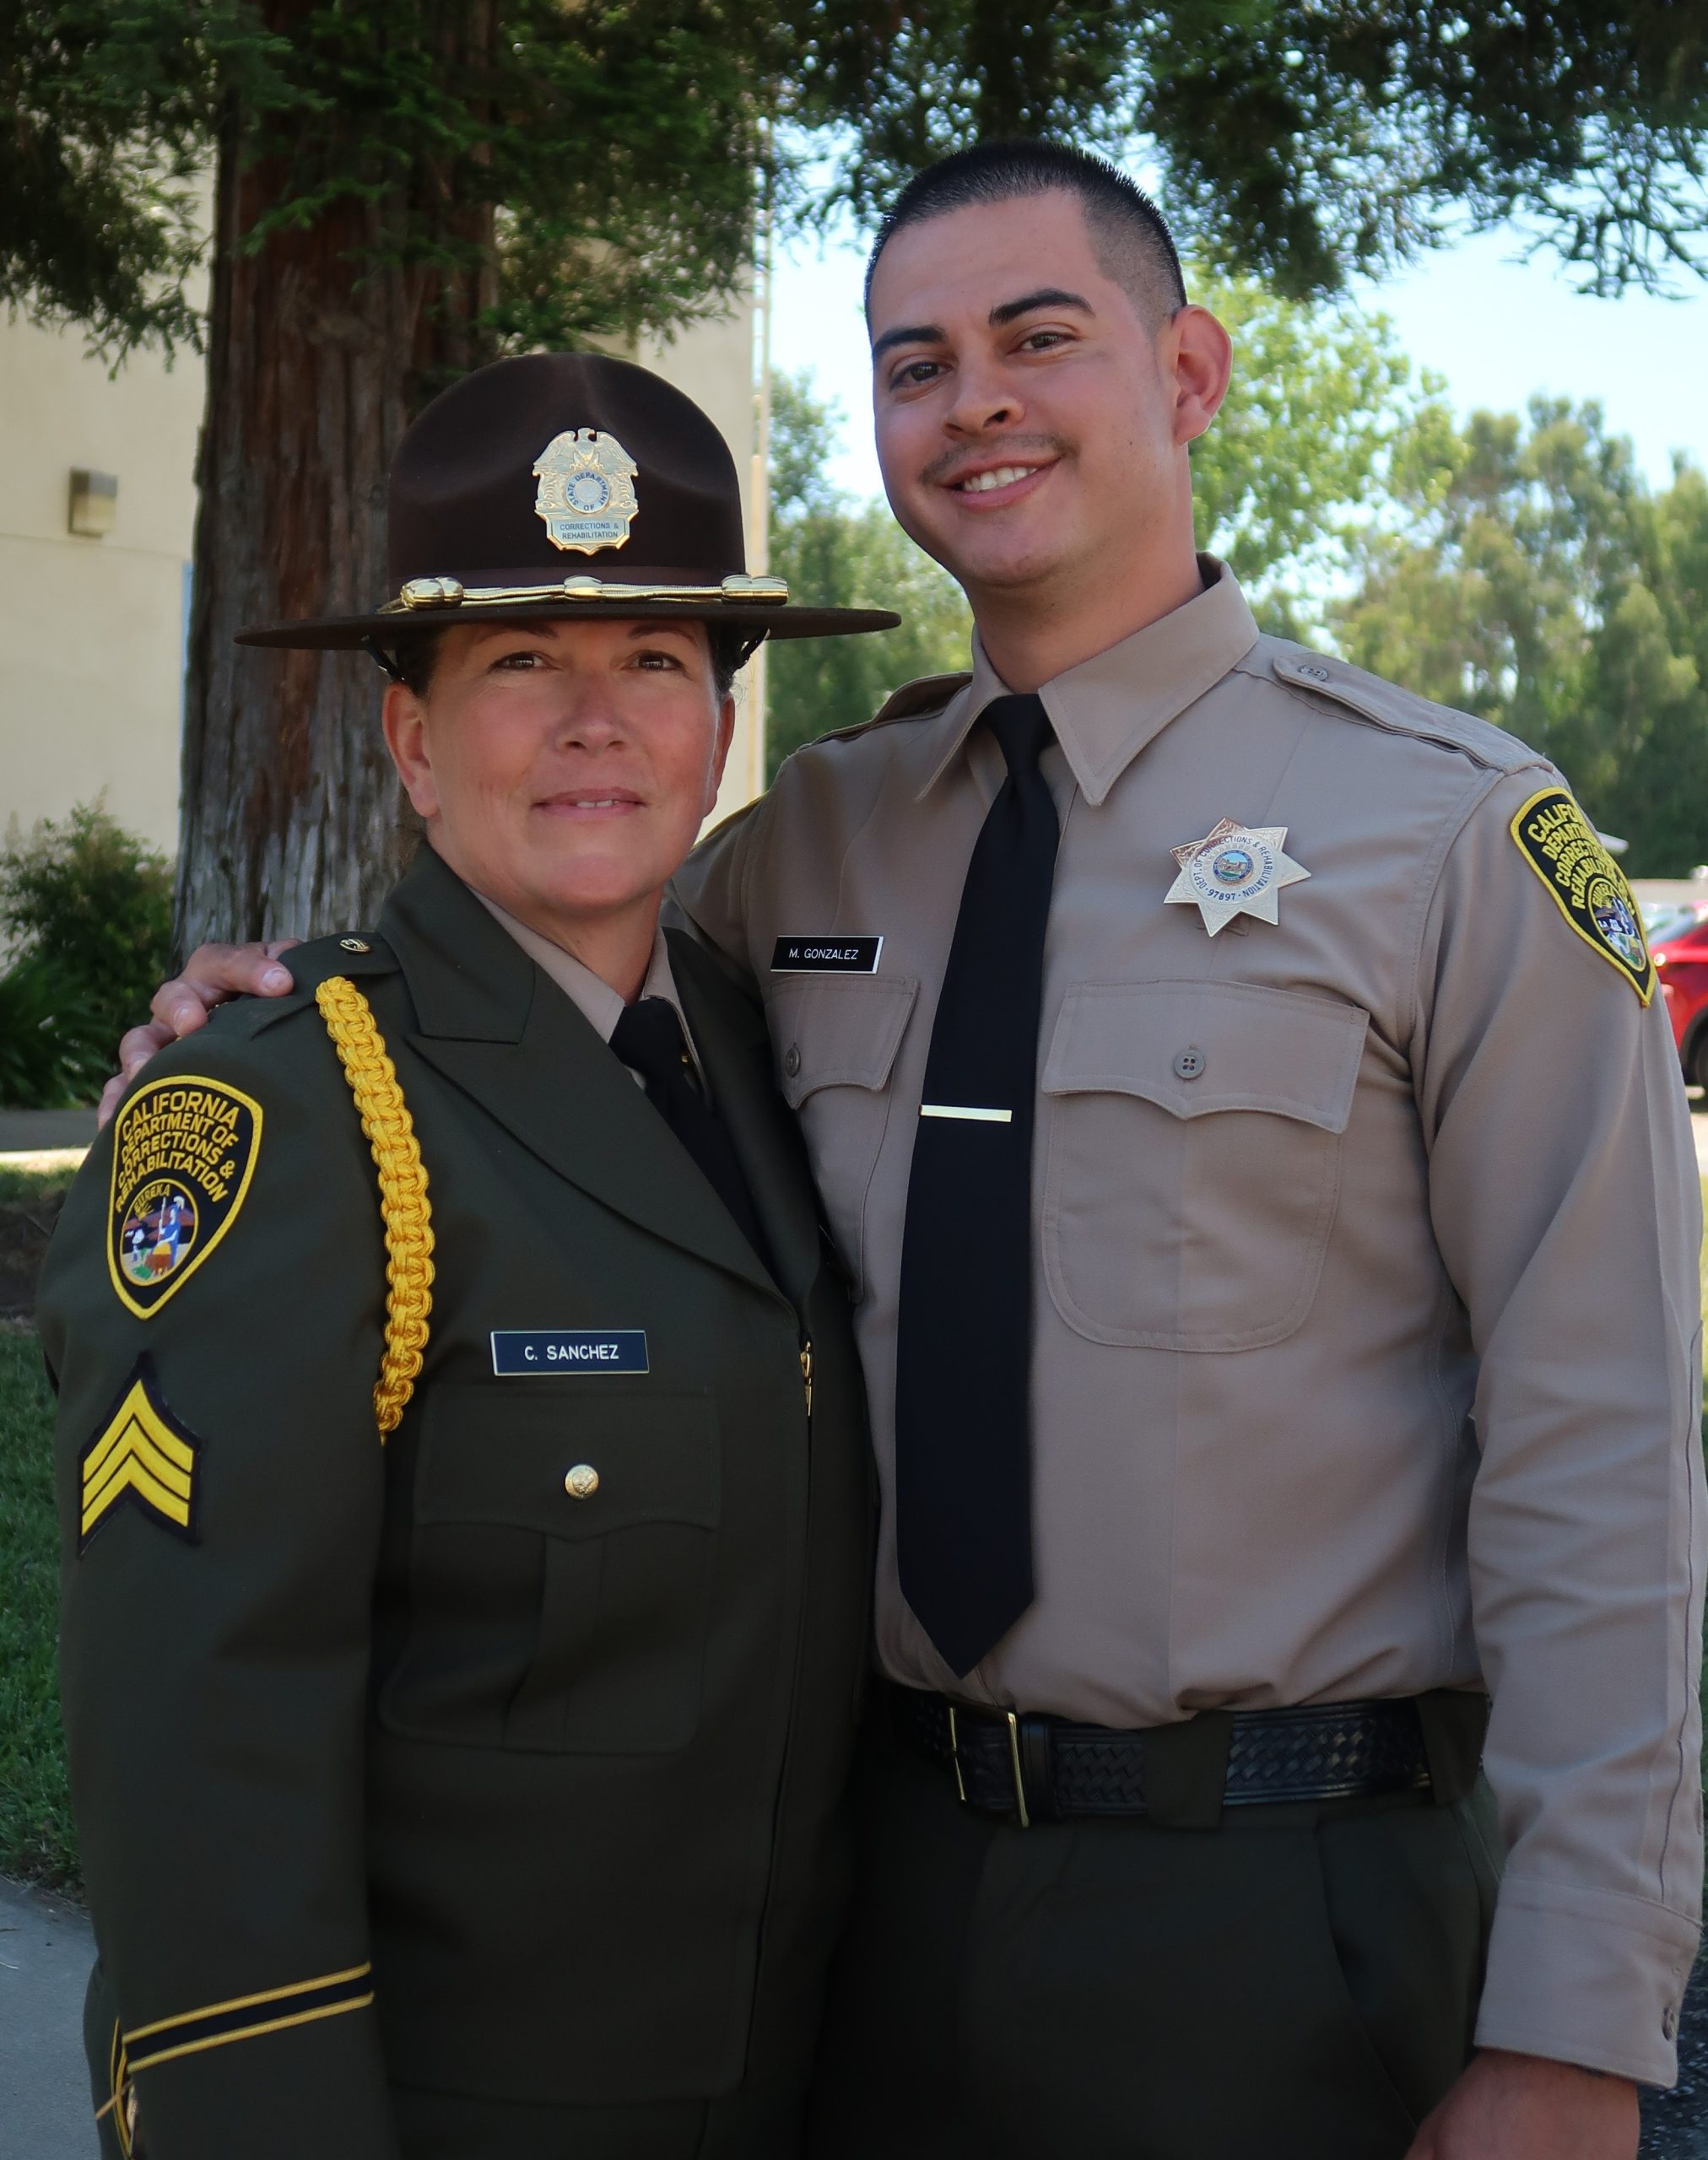 A sergeant and an officer at the academy.